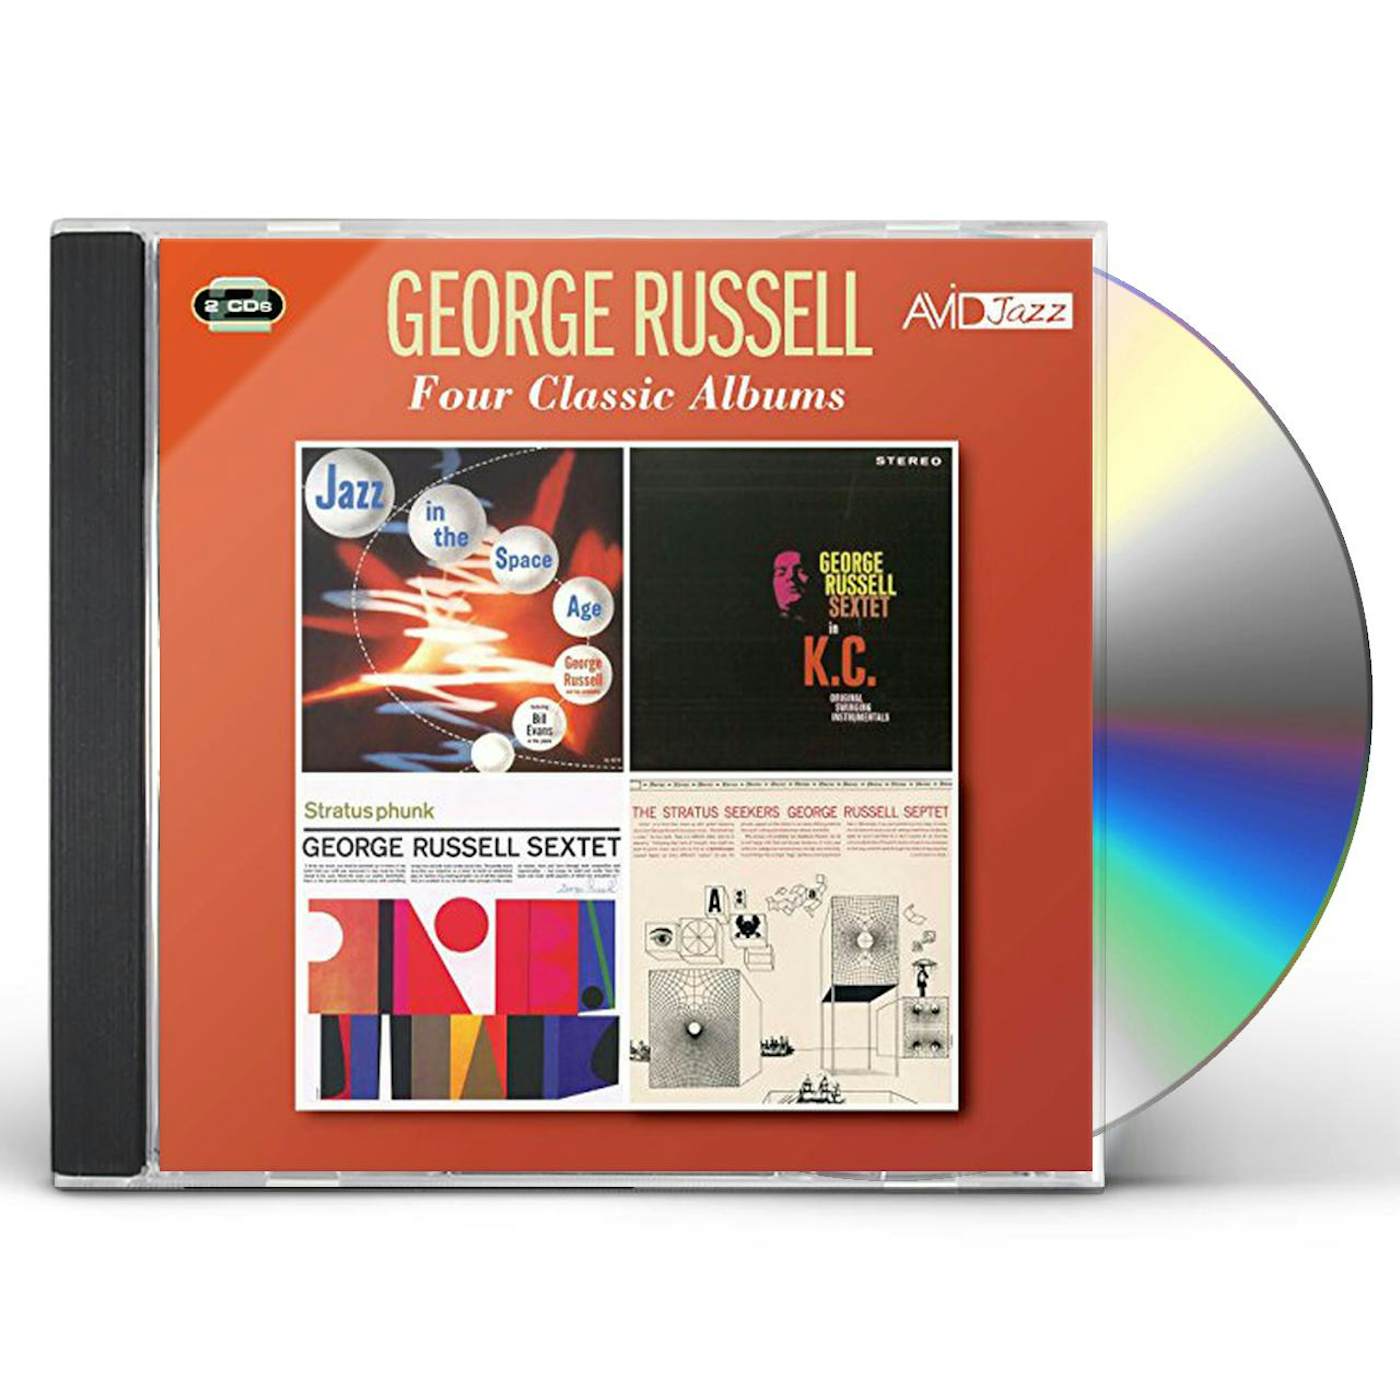 George Russell JAZZ IN THE SPACE AGE CD